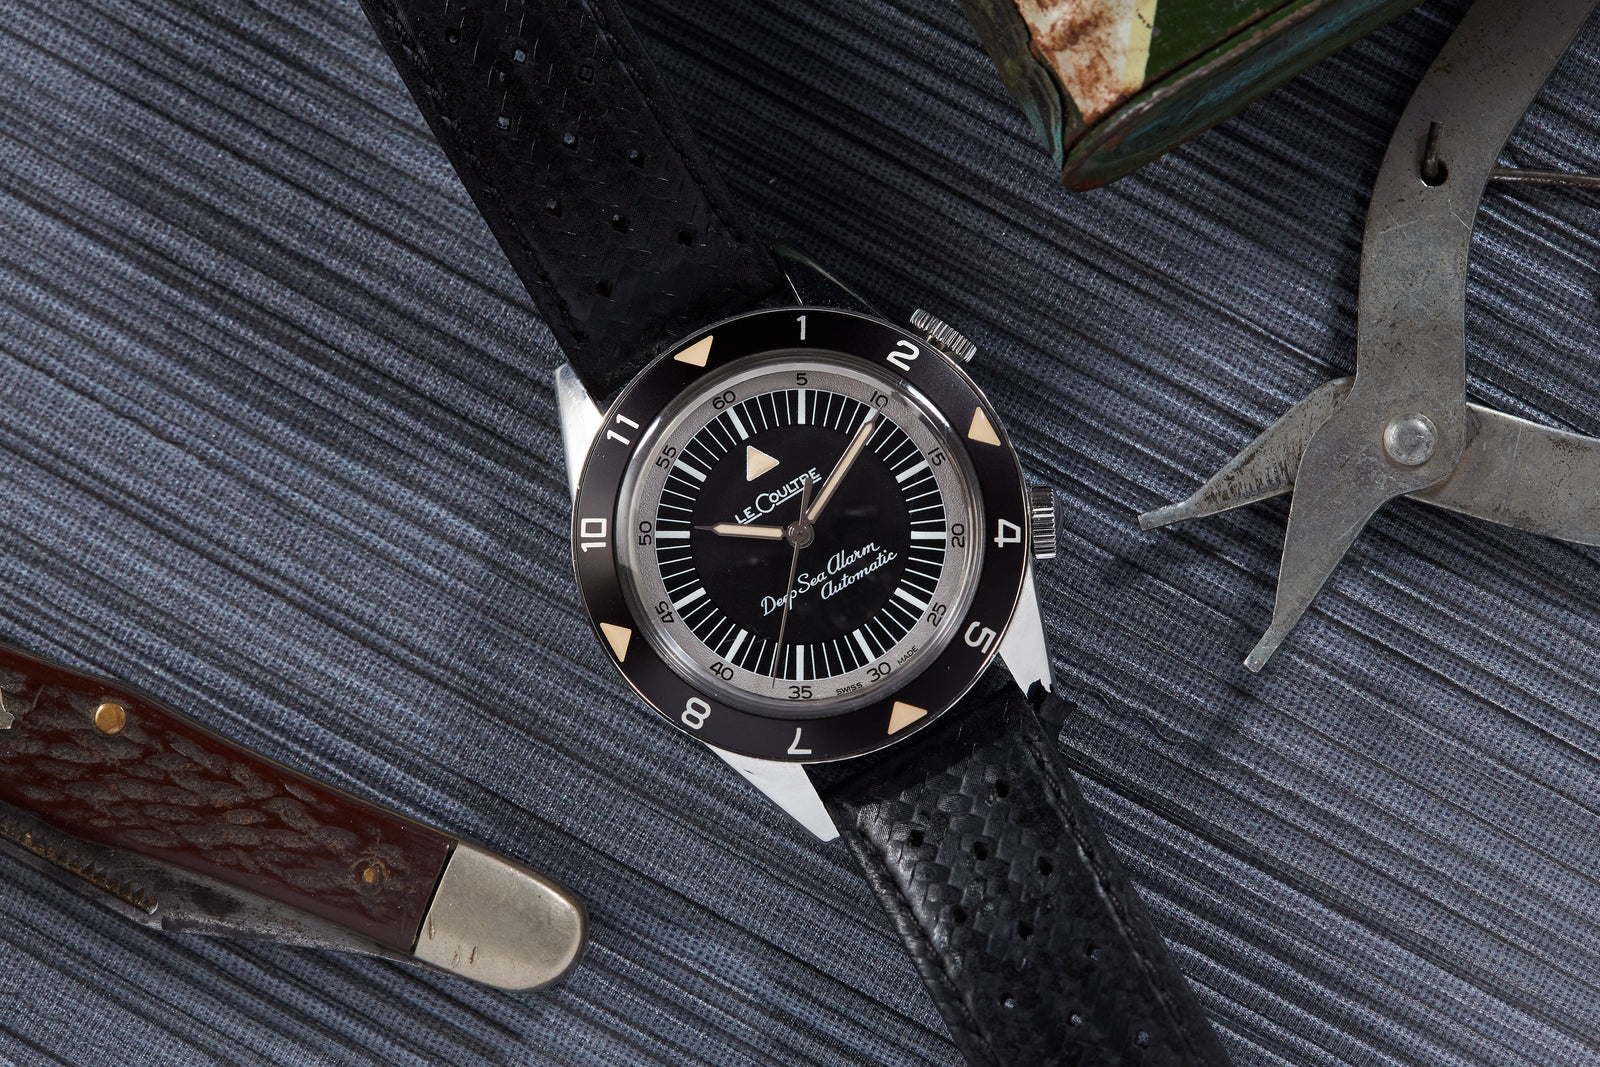 Jaeger-LeCoultre Tribute to Deep Sea Alarm